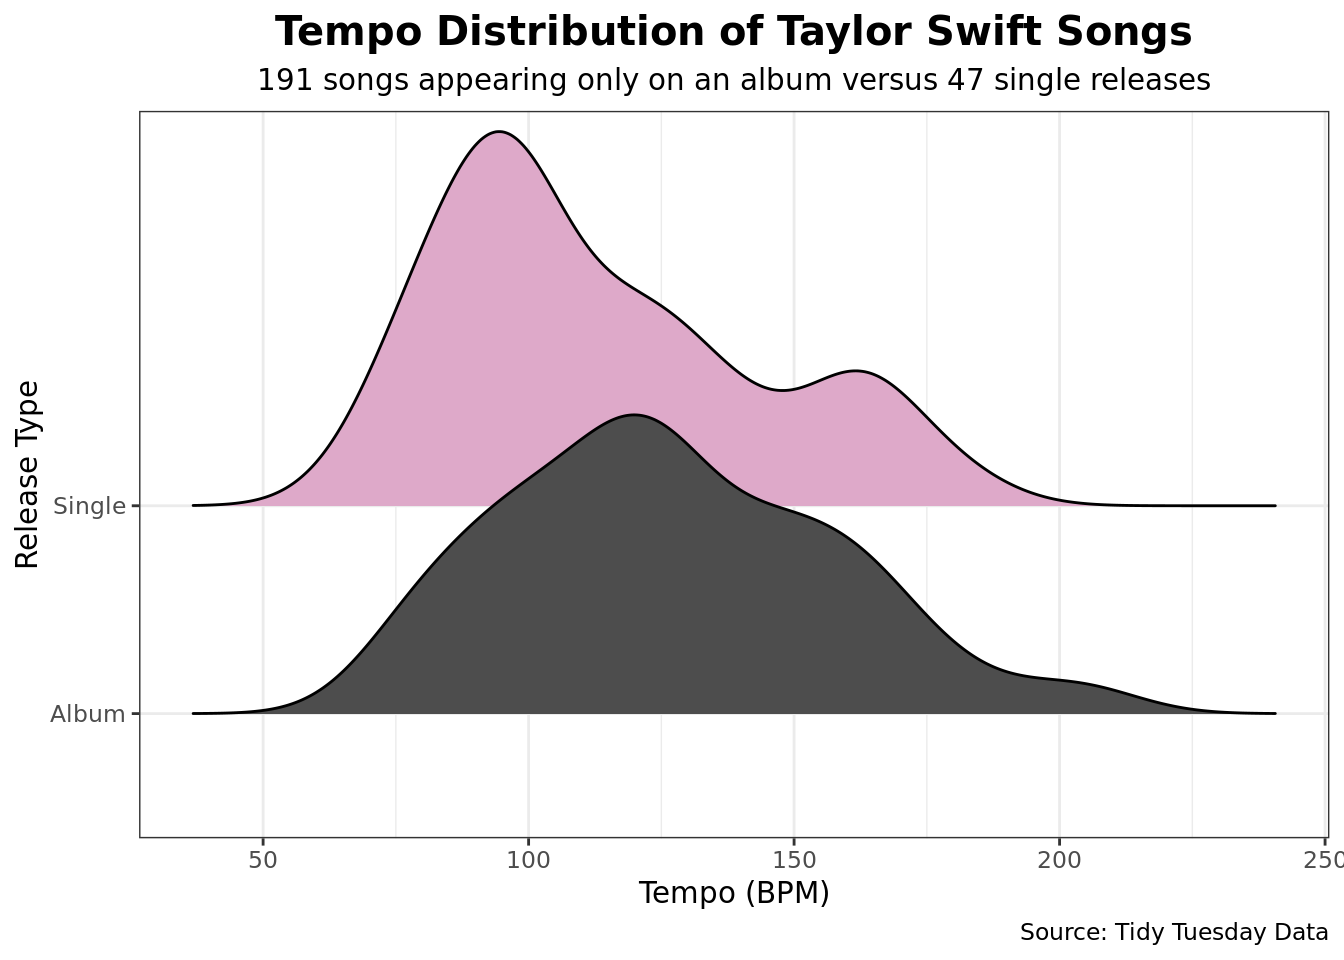 This figure is a density ridge plot titled "Tempo Distribution of Taylor Swift Songs" that dcompares the tempo of 47 single released songs versus 191 songs released on Swift's albums. The single release density ridge is right-skewed with a peak around a tempo of 90, while the album released ridge is more normally distributed with a peak around 120 tempo. The album released songs also have songs with over a 200 tempo, while the single realeased songs do not.